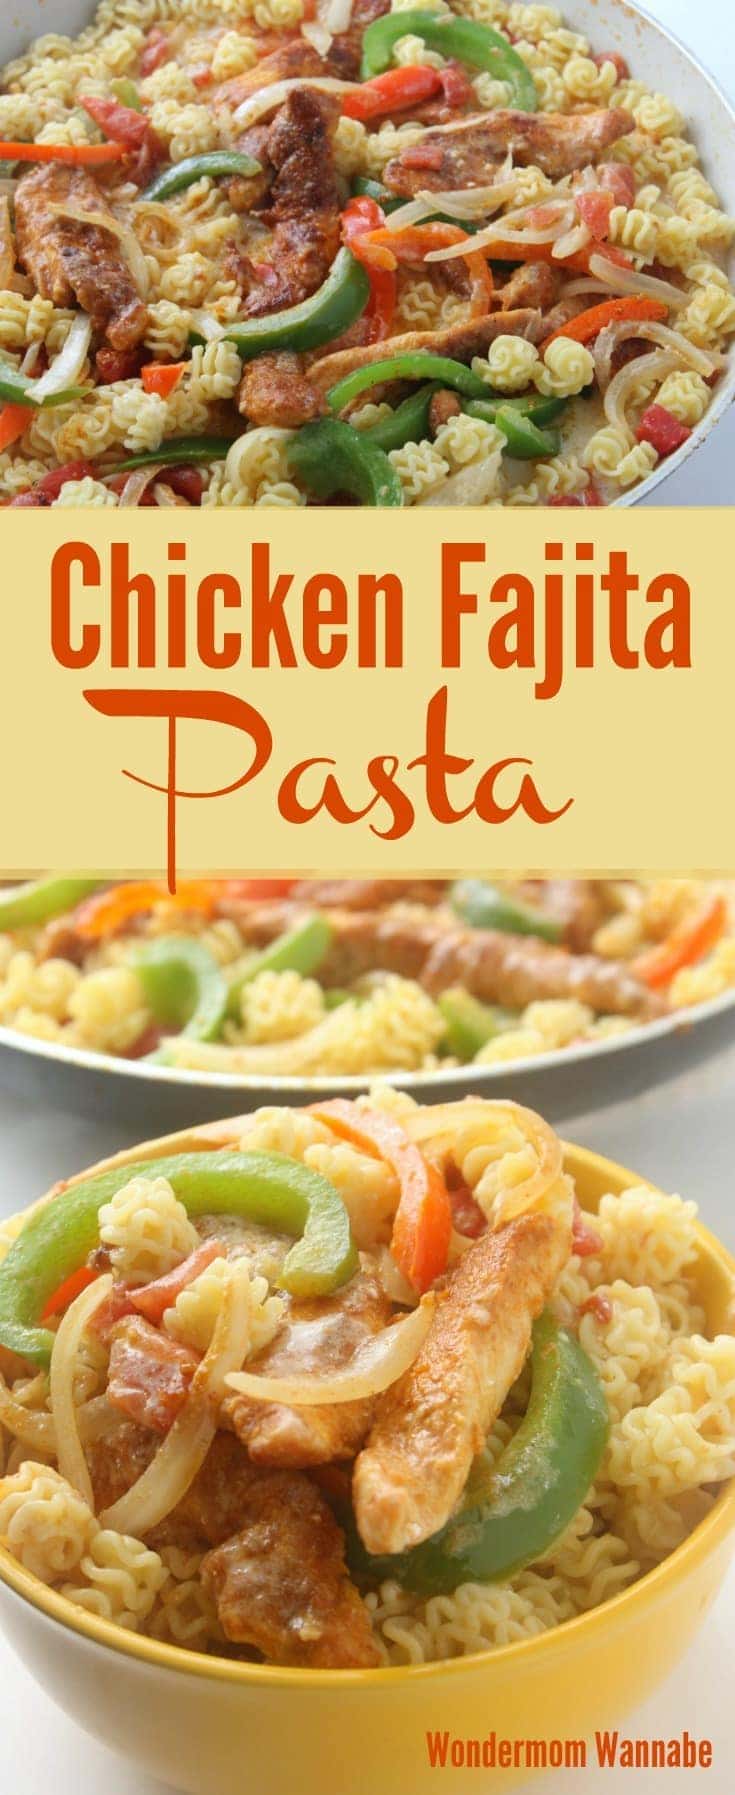 This Chicken Fajita Pasta combines the best of both worlds - delicious Mexican flavor in the convenience of a pasta dish! #chickenfajita #pasta #mexicanfood #dinner via @wondermomwannab